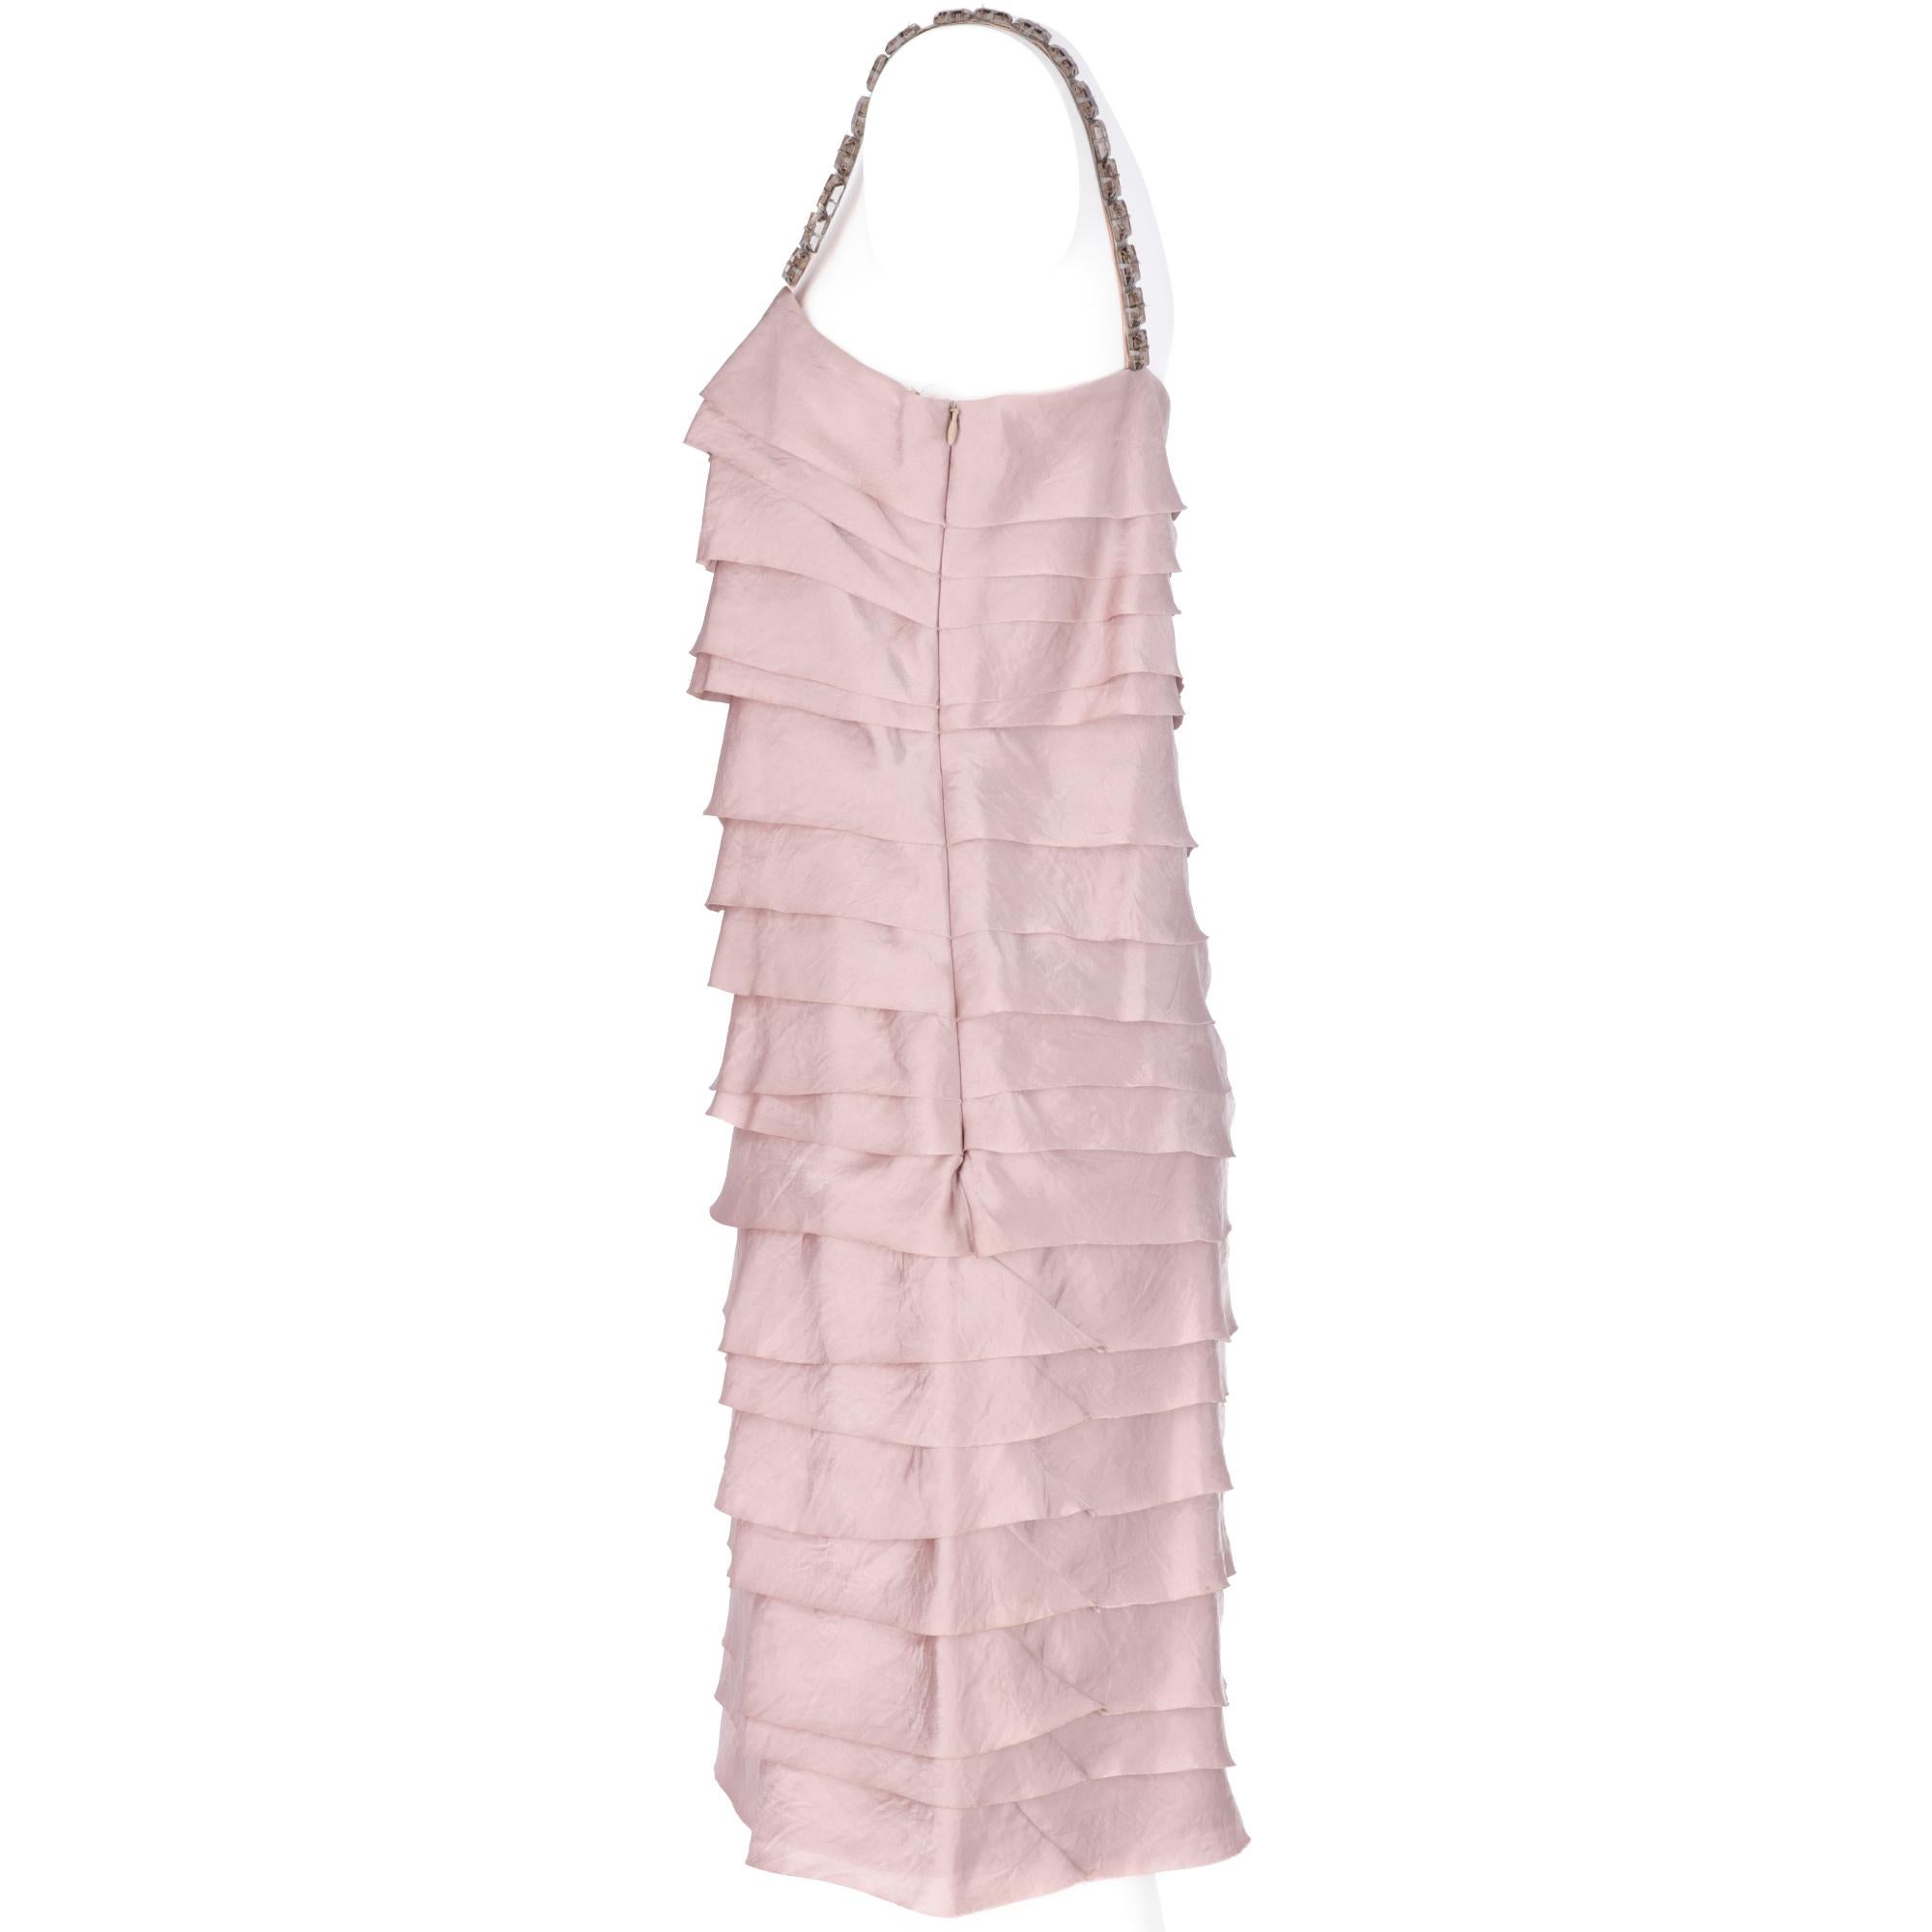 Lanvin antique pink dress long above the knee, straight neckline, flounces along the dress and straps decorated with large and transparent stones, side closure with invisible zip.

The item has slight signs of wear on a stone as shown in the